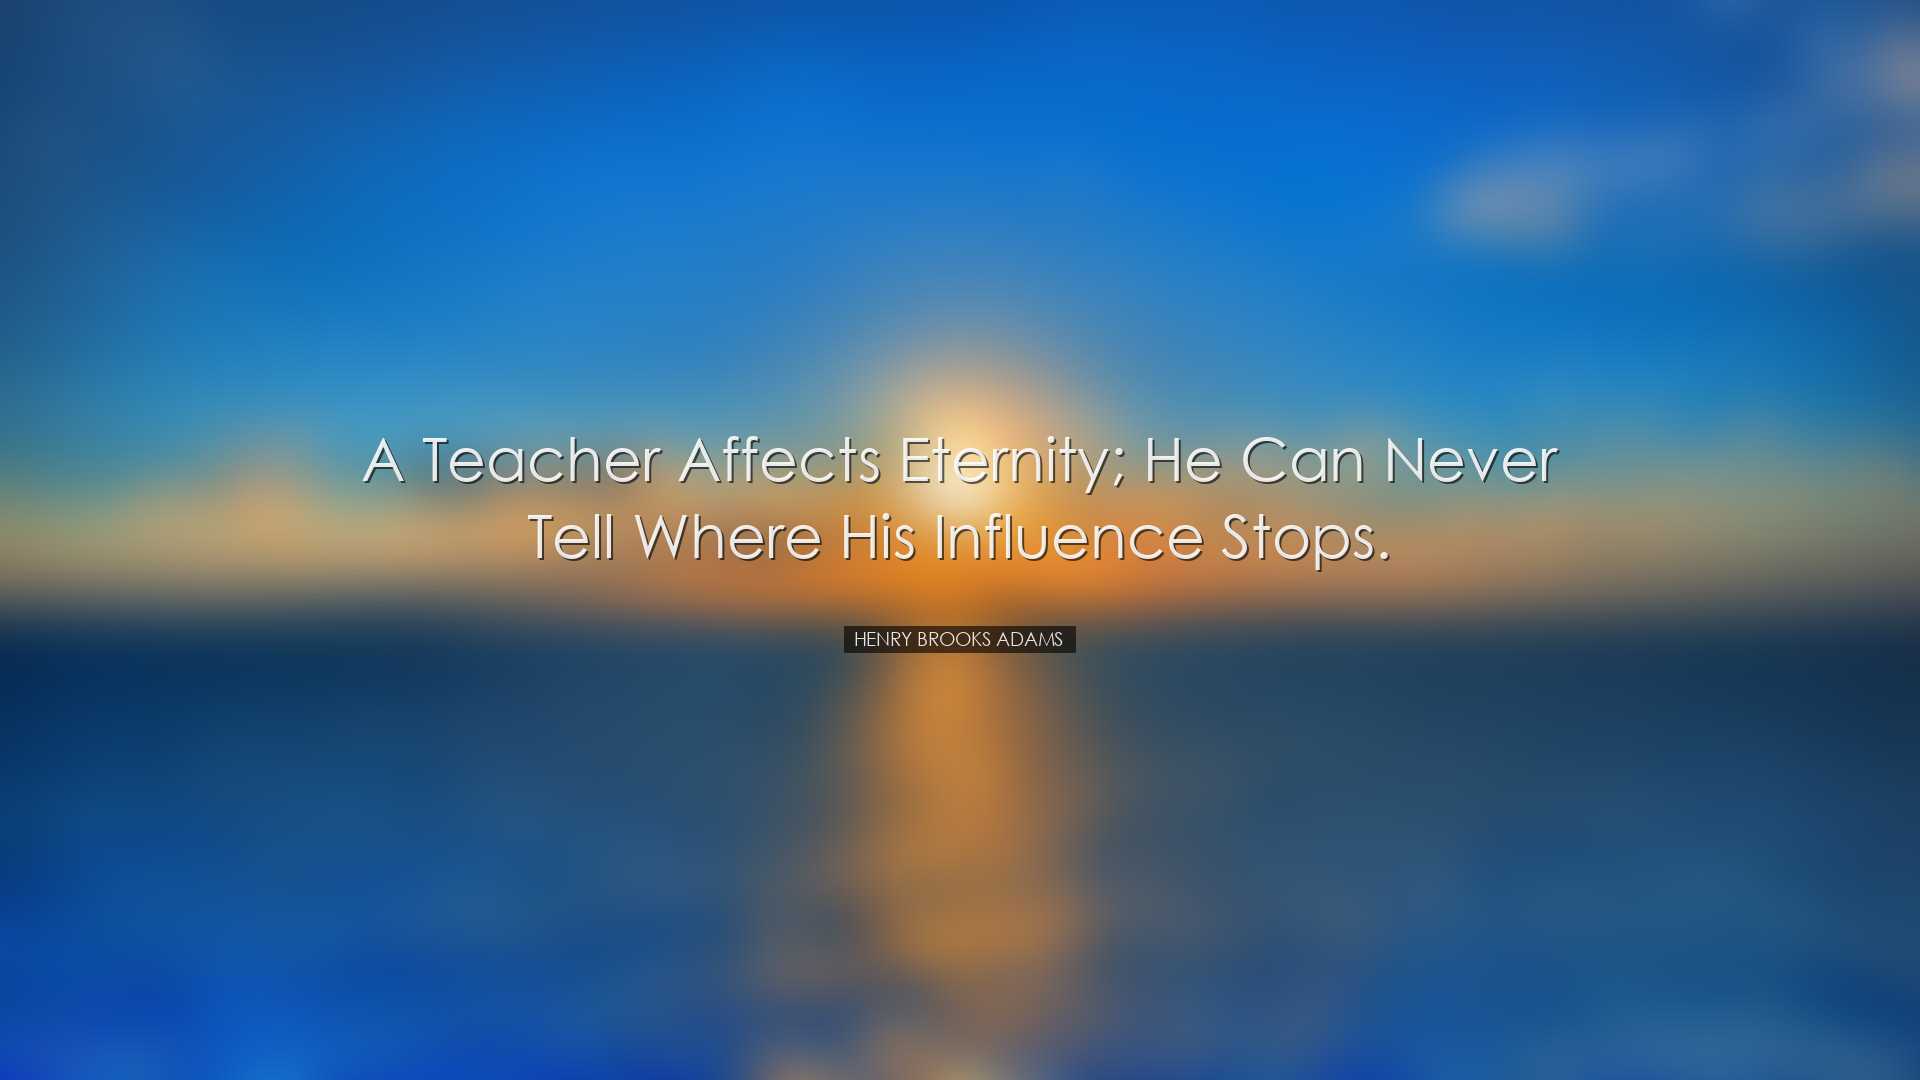 A teacher affects eternity; he can never tell where his influence